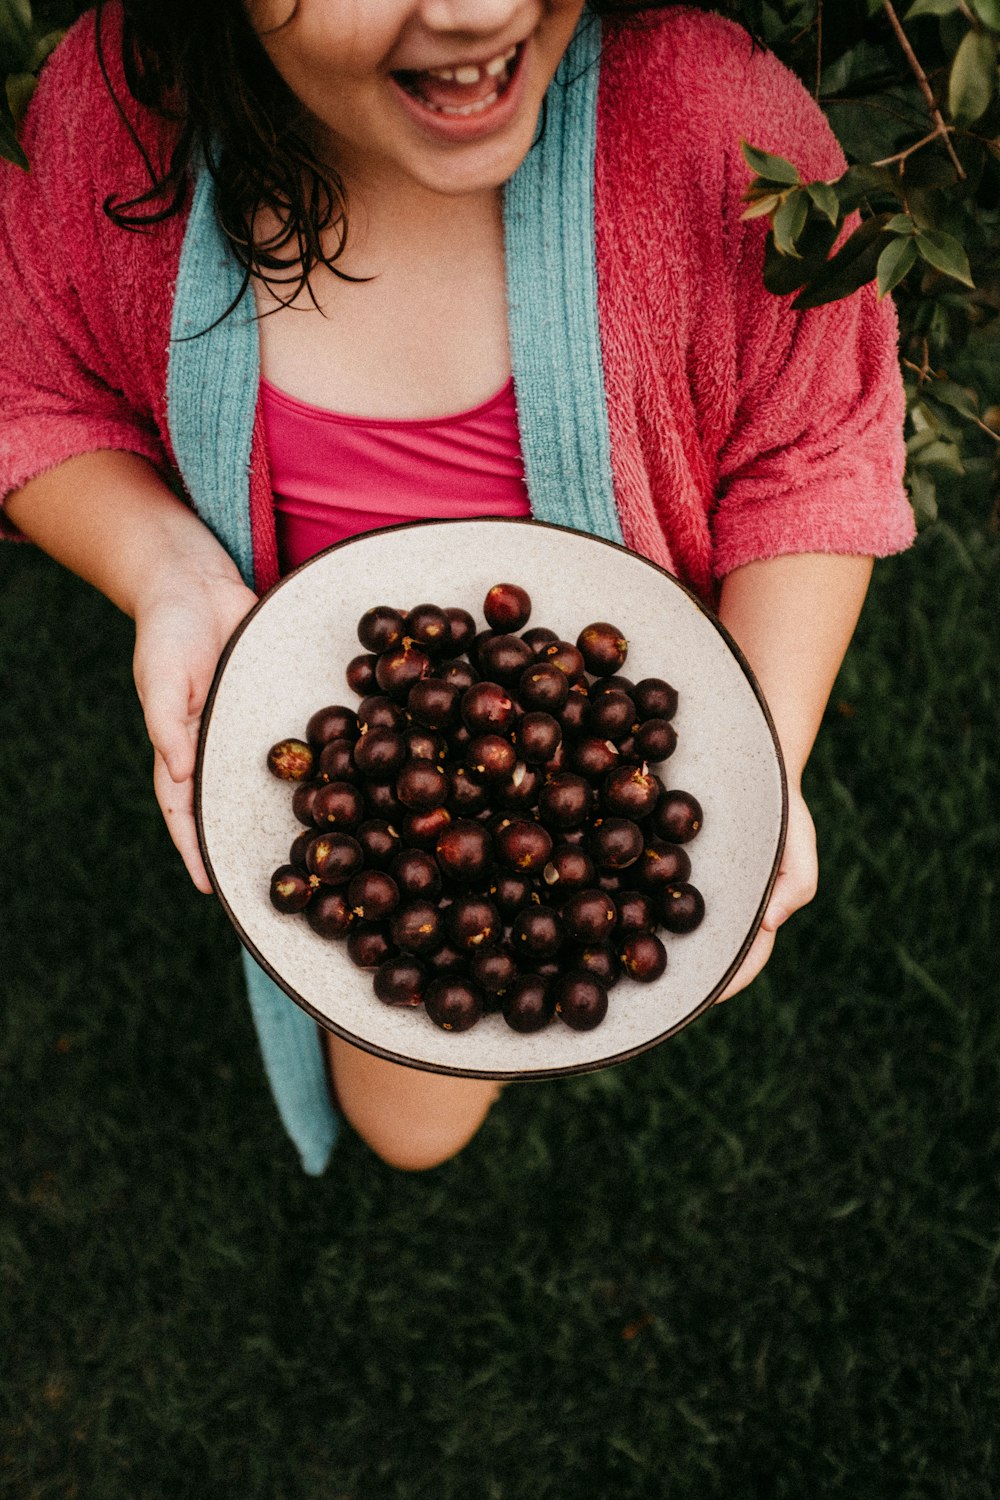 a girl holding a plate of chestnuts in her hands